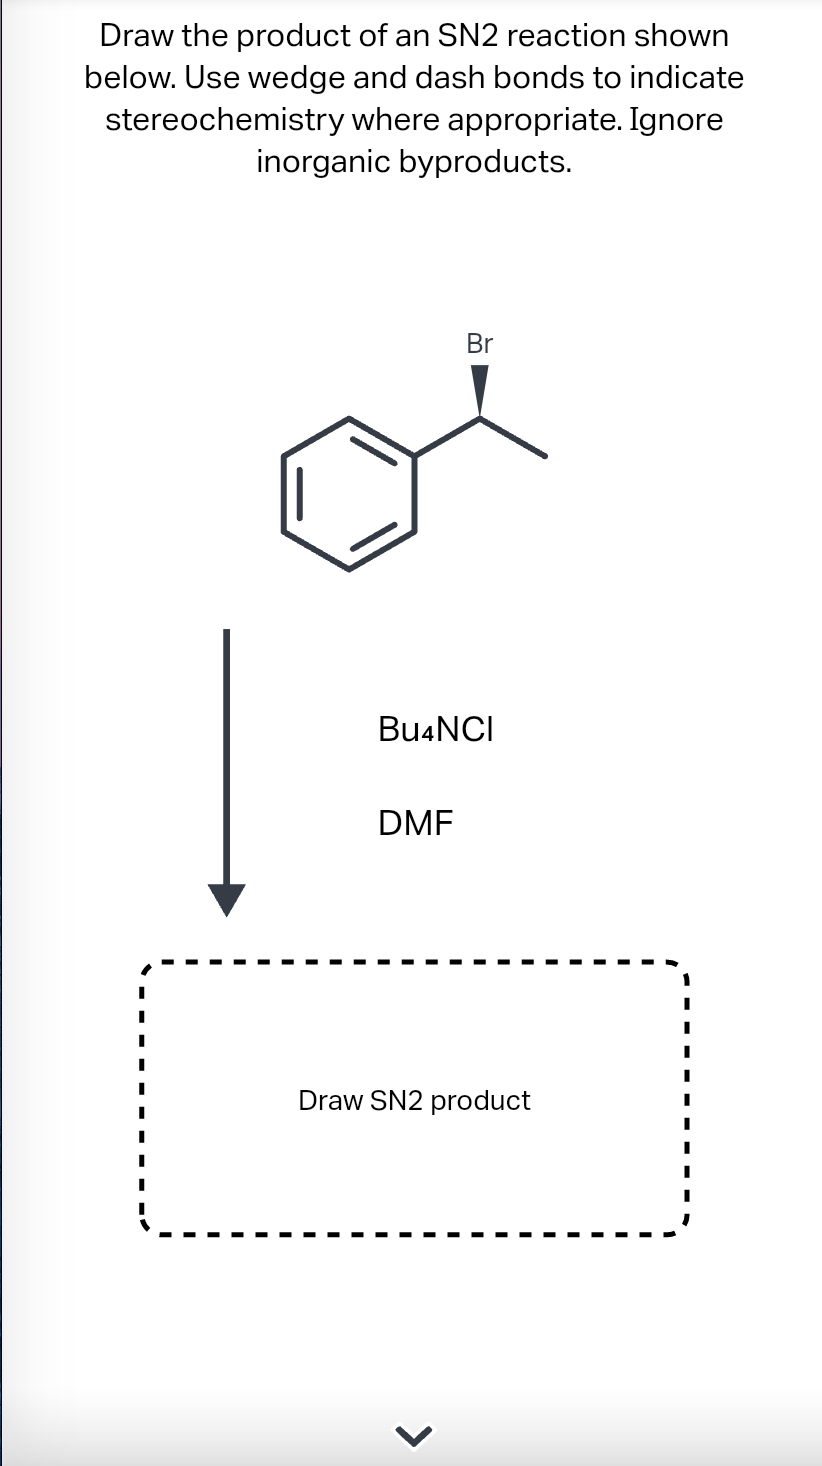 Draw the product of an SN2 reaction shown
below. Use wedge and dash bonds to indicate
stereochemistry where appropriate. Ignore
inorganic byproducts.
Br
Bu4NCI
DMF
Draw SN2 product